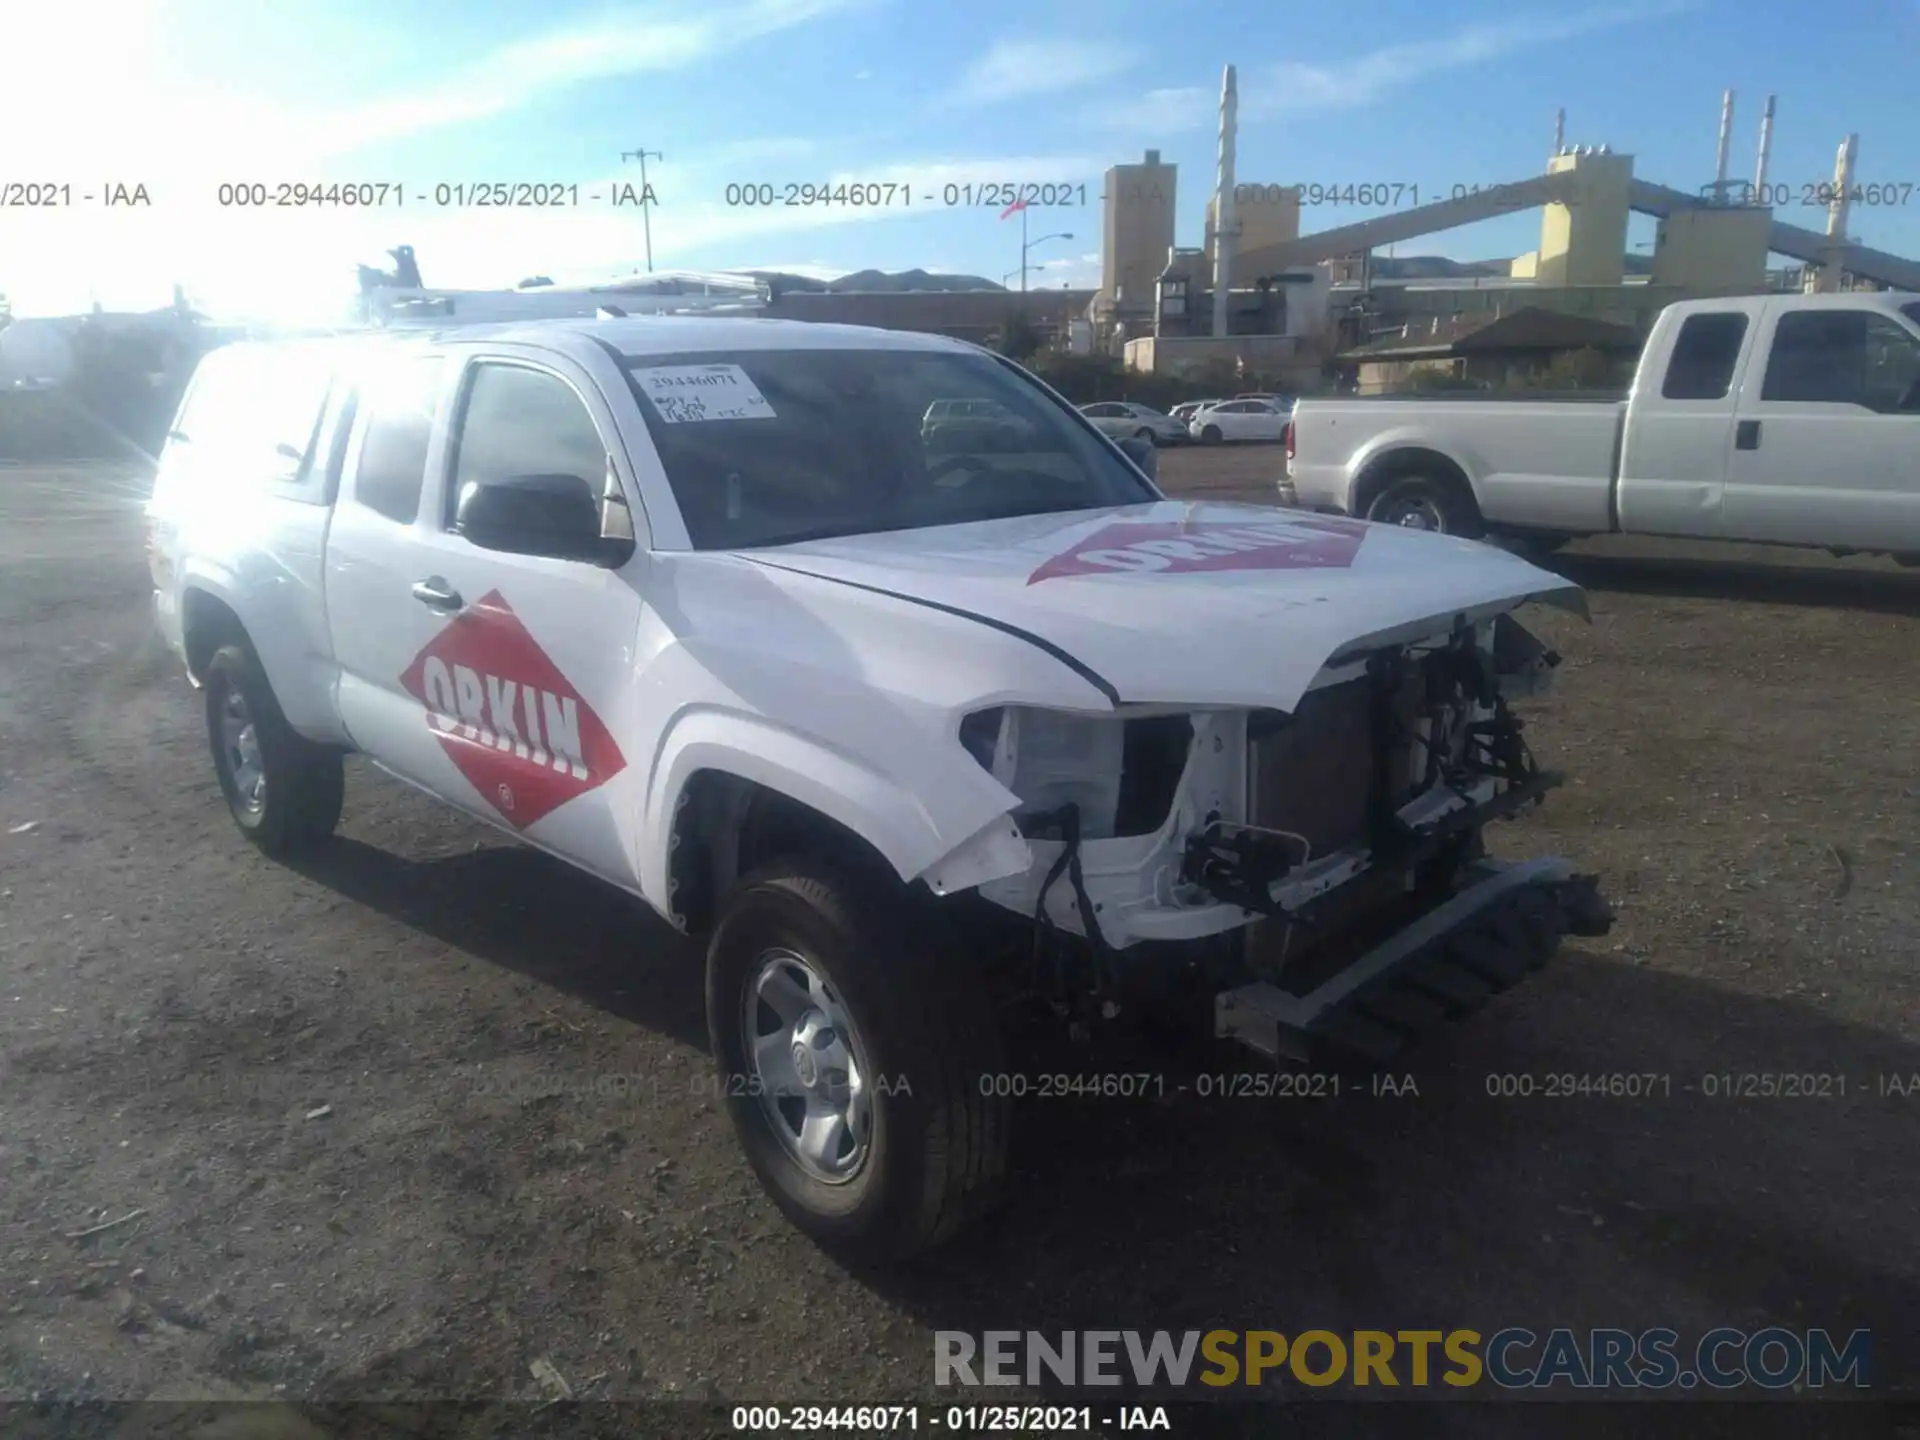 1 Photograph of a damaged car 5TFRX5GN1LX170378 TOYOTA TACOMA 2WD 2020